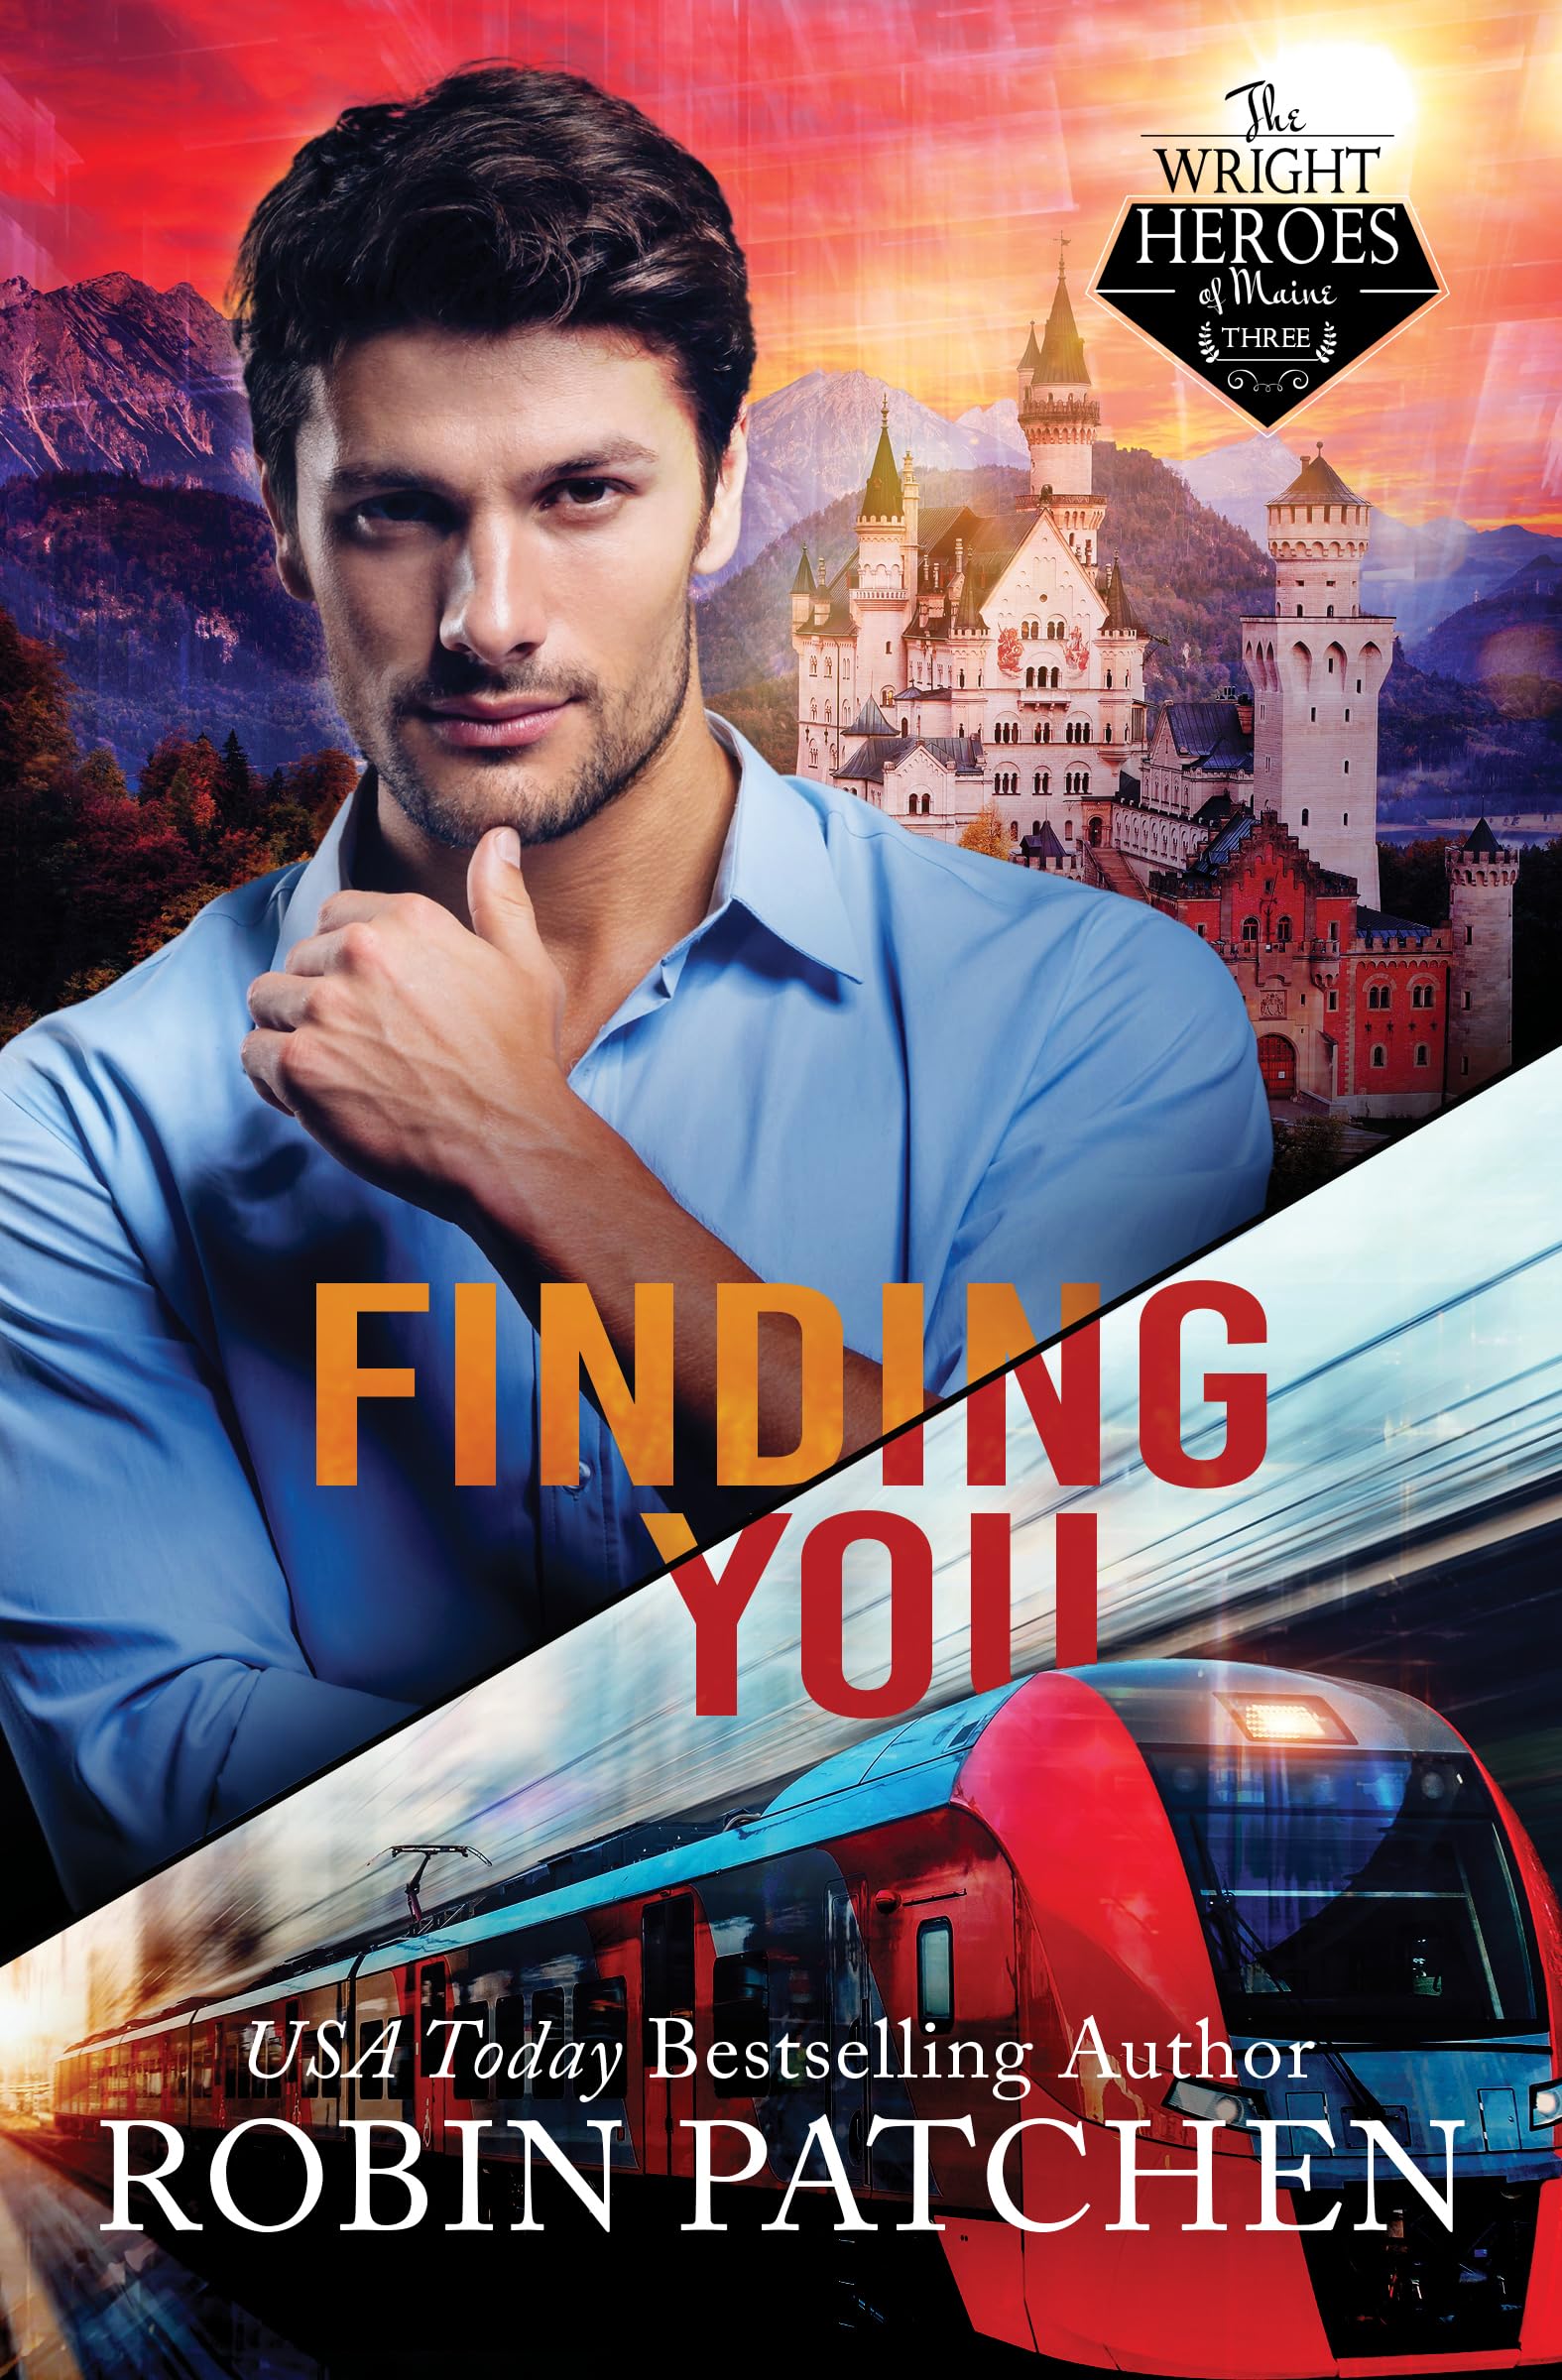 Finding You: Deception and Danger in Shadow Cove (The Wright Heroes of Maine Book 3)